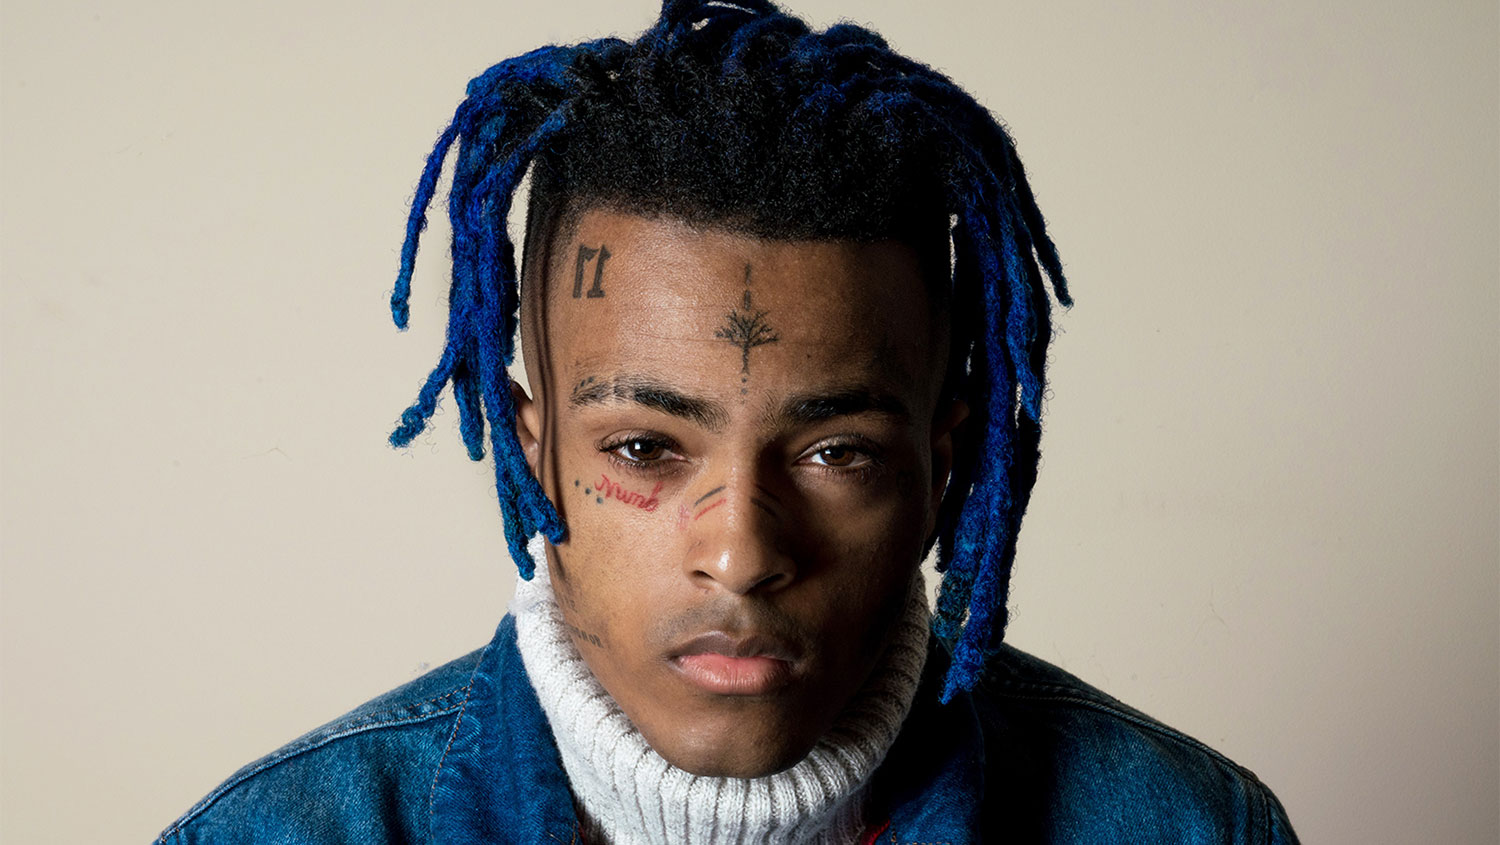 XXXTentacion's Manager Solomon Sobande &amp; Producer John Cunningham Give Track-by-Track Breakdown of 'Bad Vibes Forever' - www.billboard.com